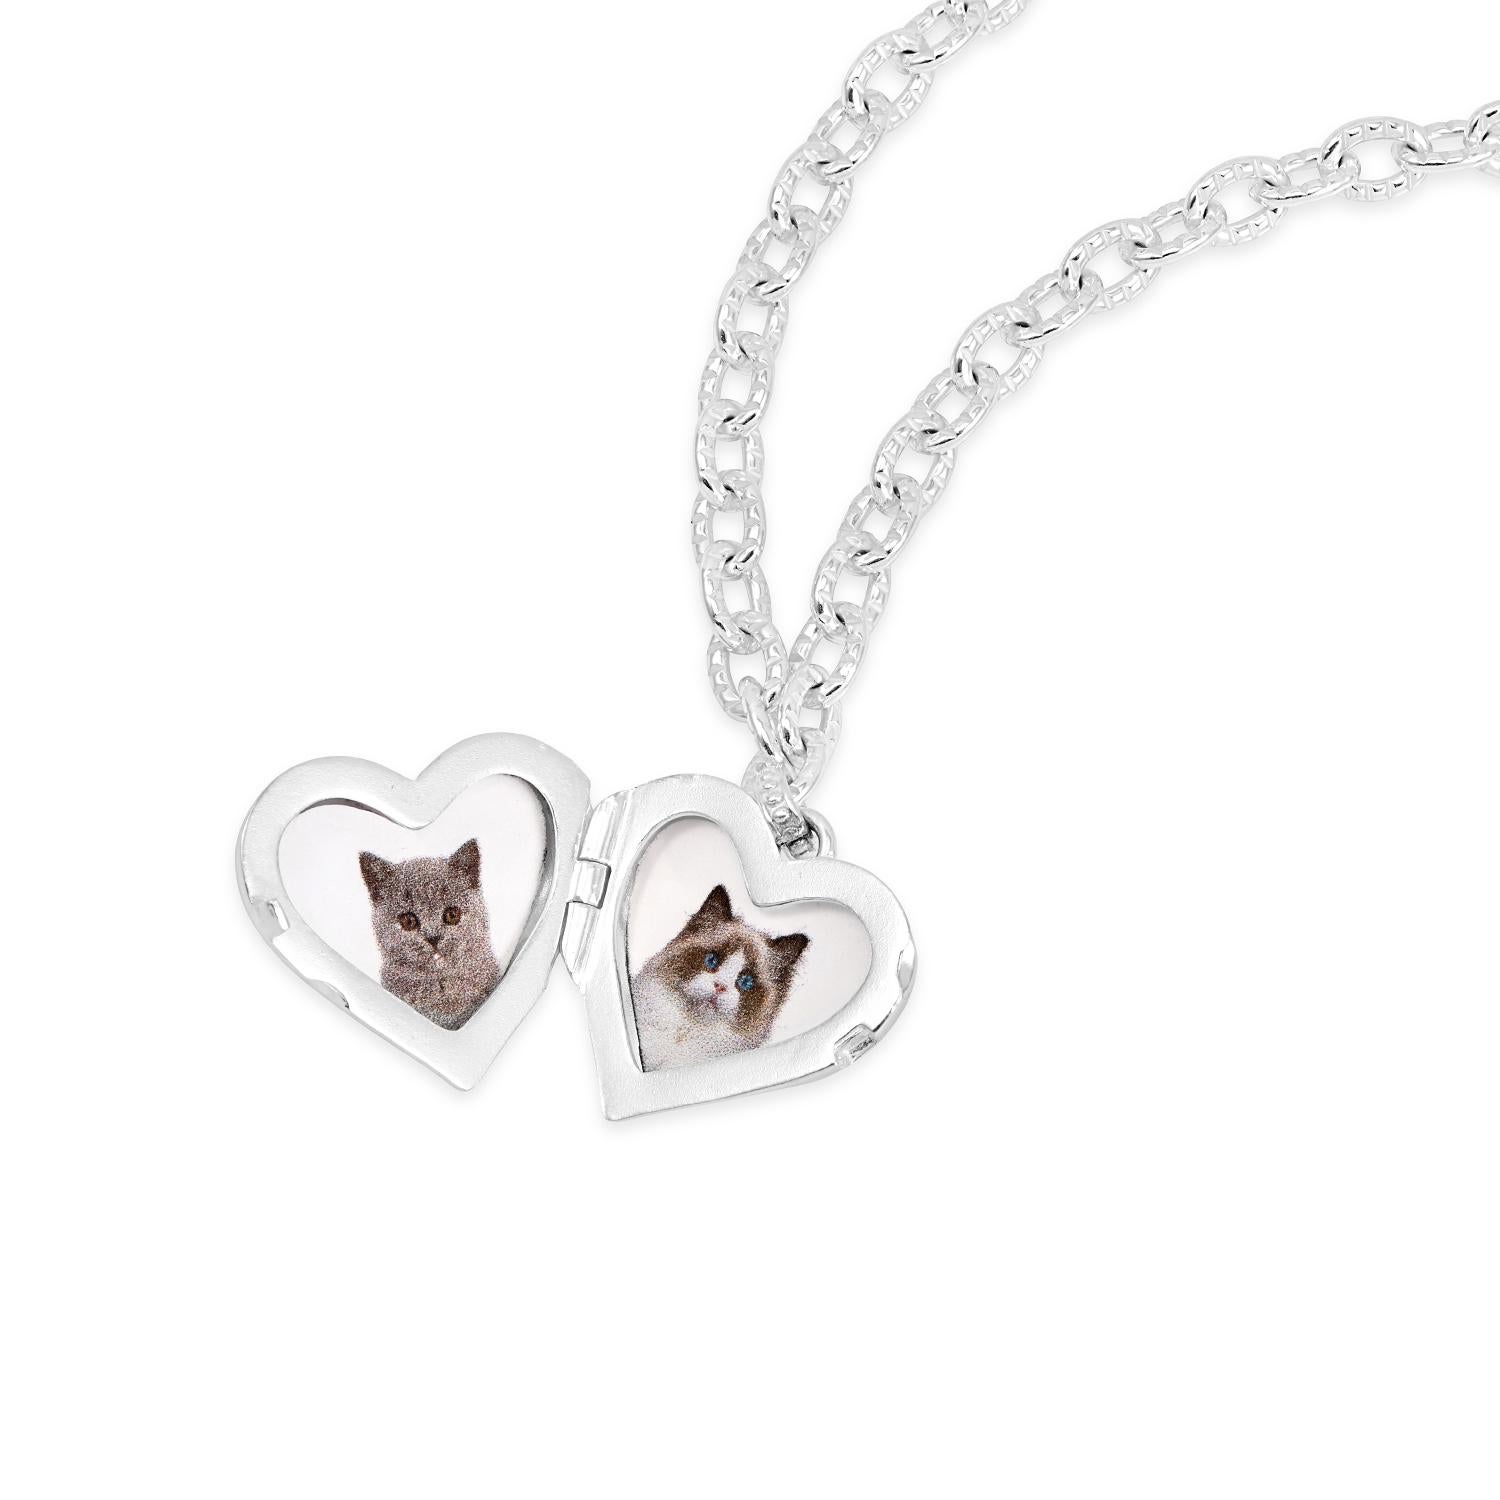 Celebrate your precious stories with our timeless, classic sterling silver 'Treasured Heart' locket, suspended on our distinctive chunky groove chain and finished with our signature D&H lobster catch. Add personal photographs, precious keepsakes or